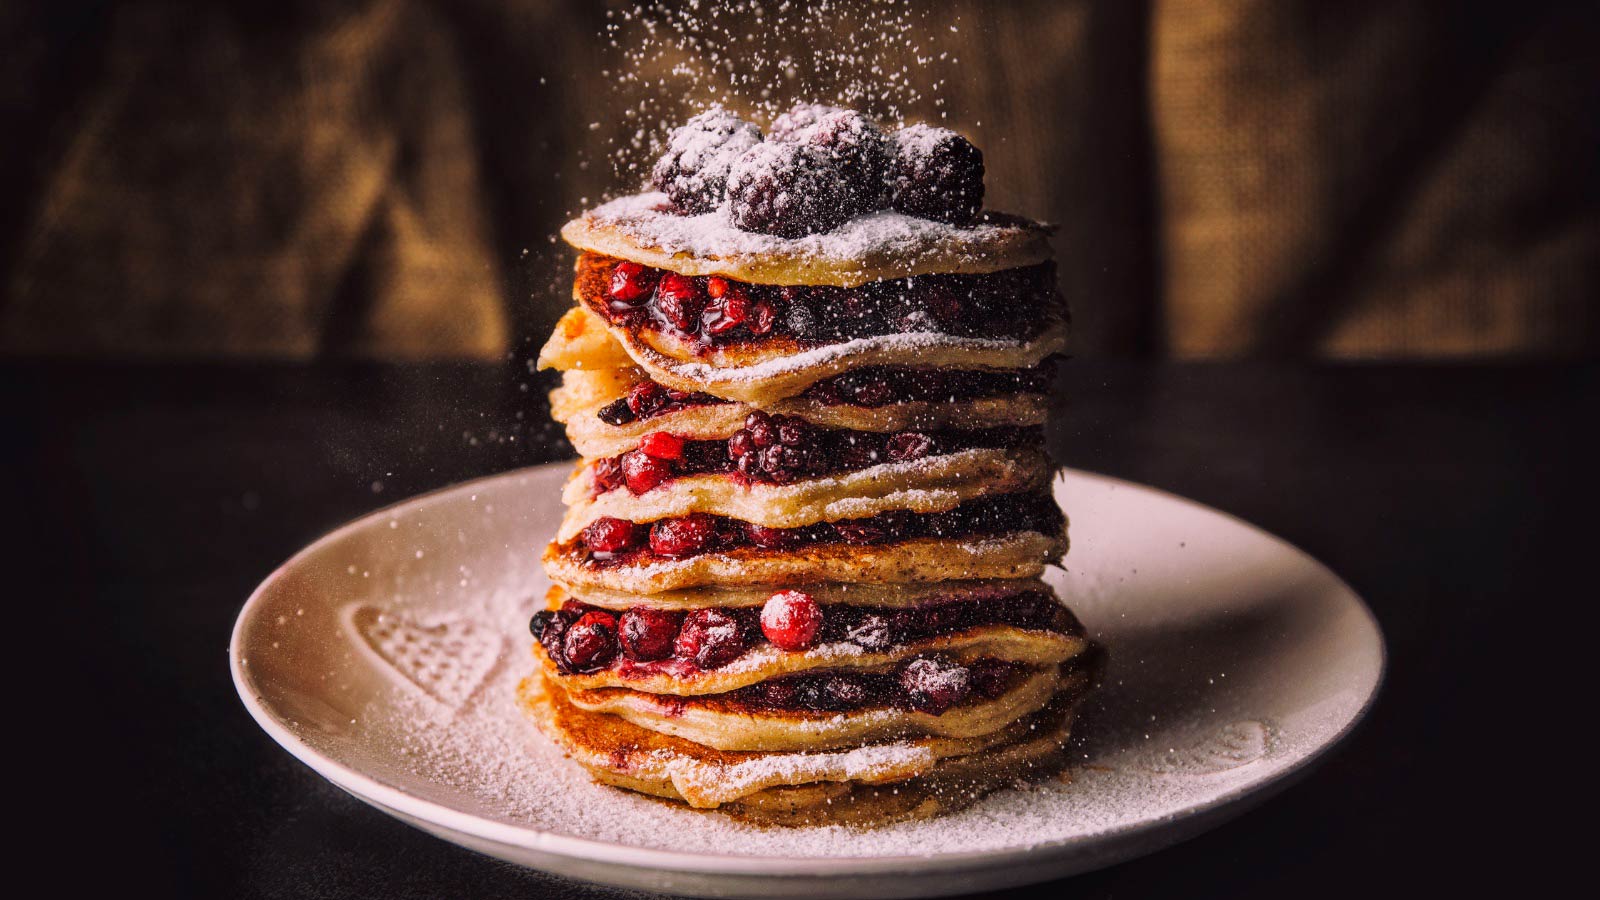 A stack of Pancakes with berries and sugar on a plate.